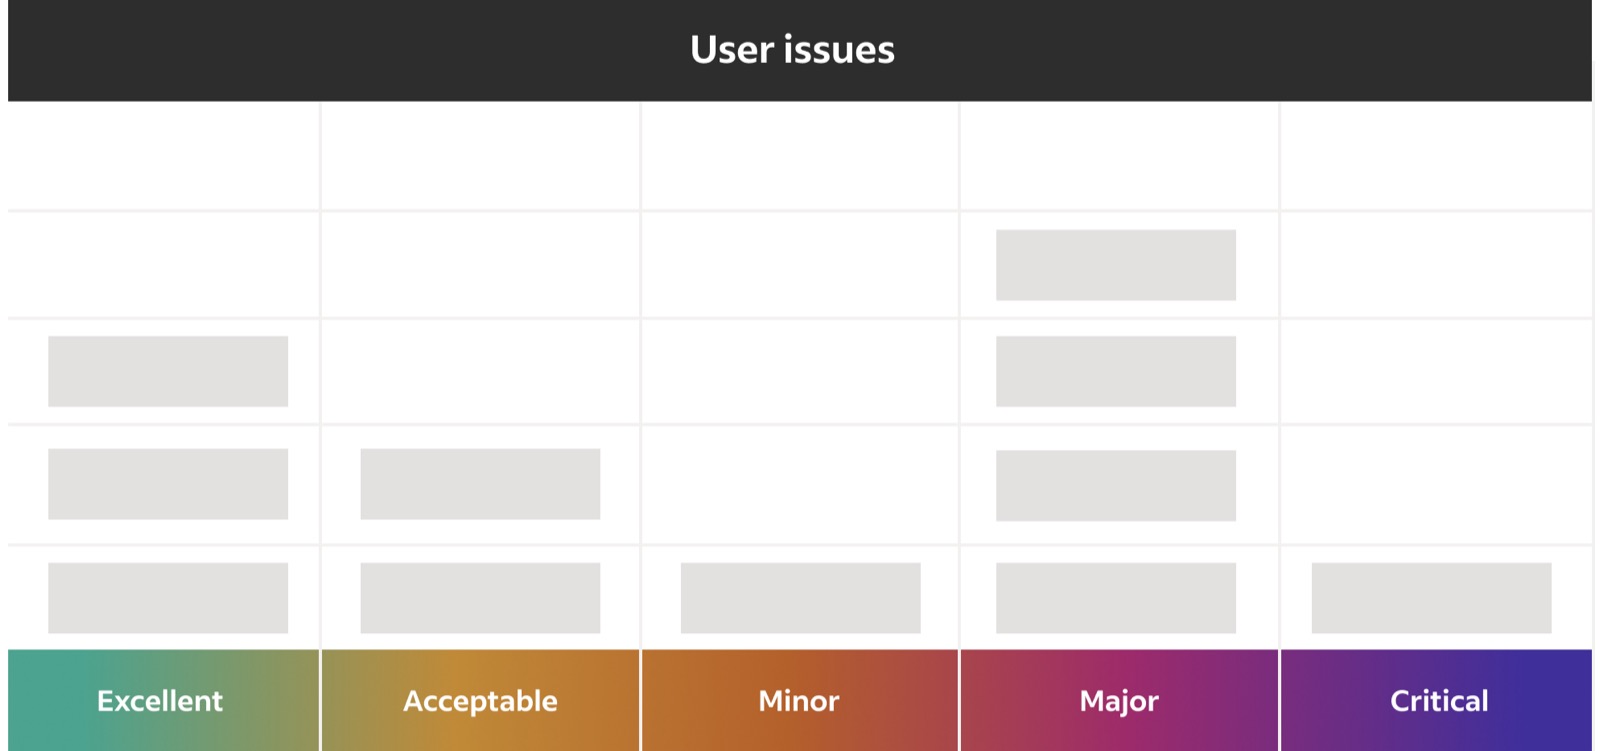 Table of user issues ranked in five categories labeled with the text: excellent, acceptable, minor, major, critical.